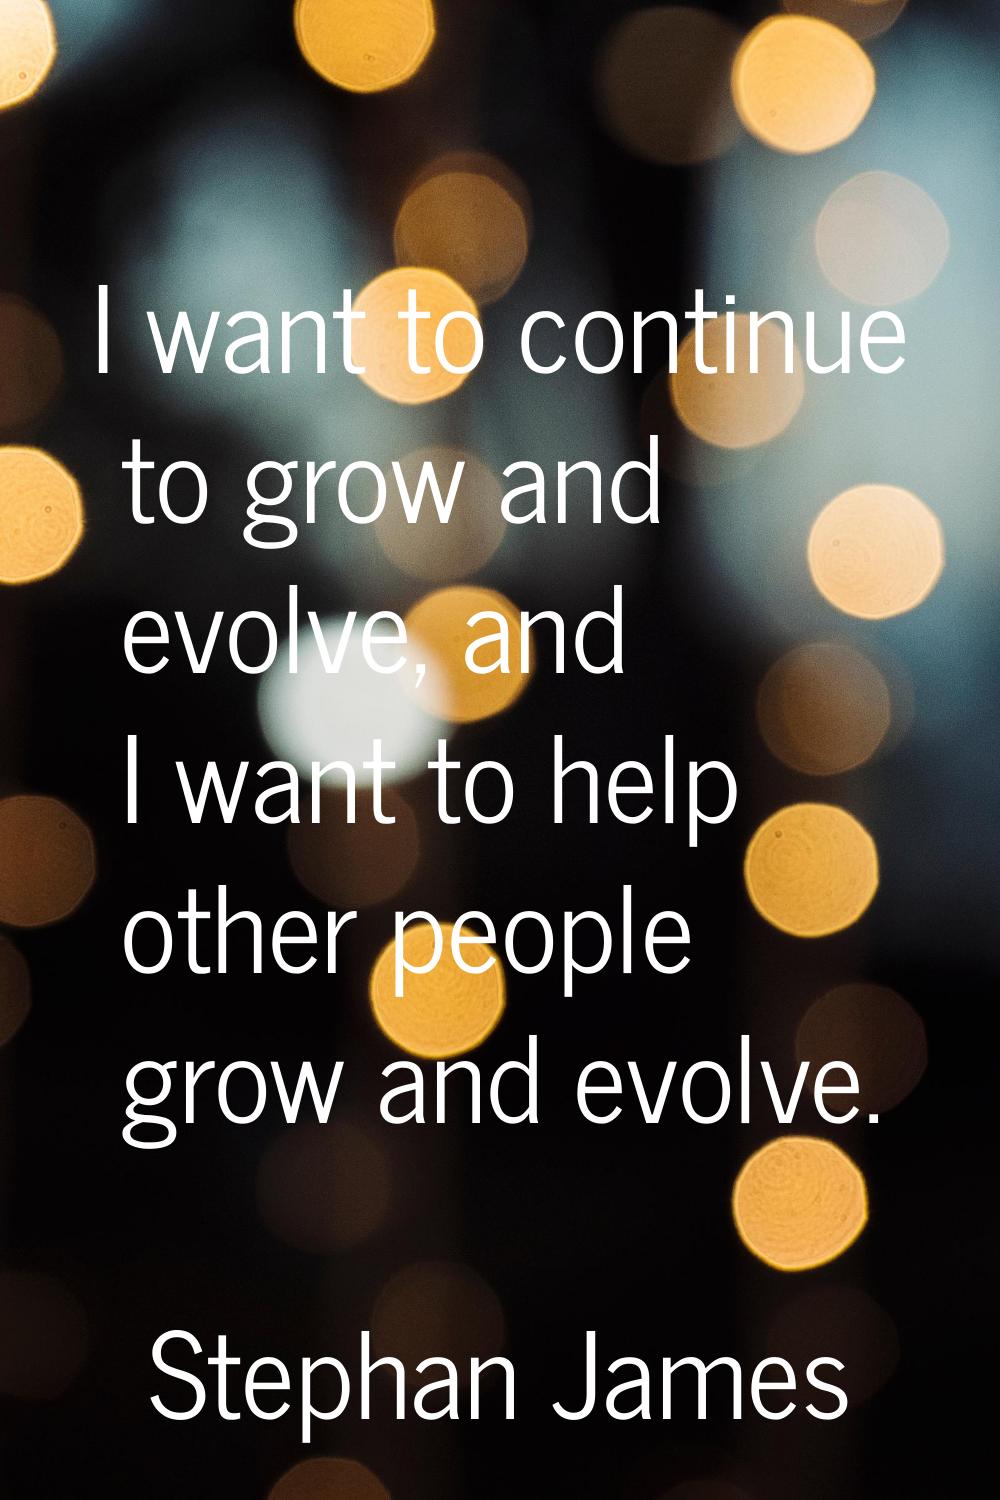 I want to continue to grow and evolve, and I want to help other people grow and evolve.